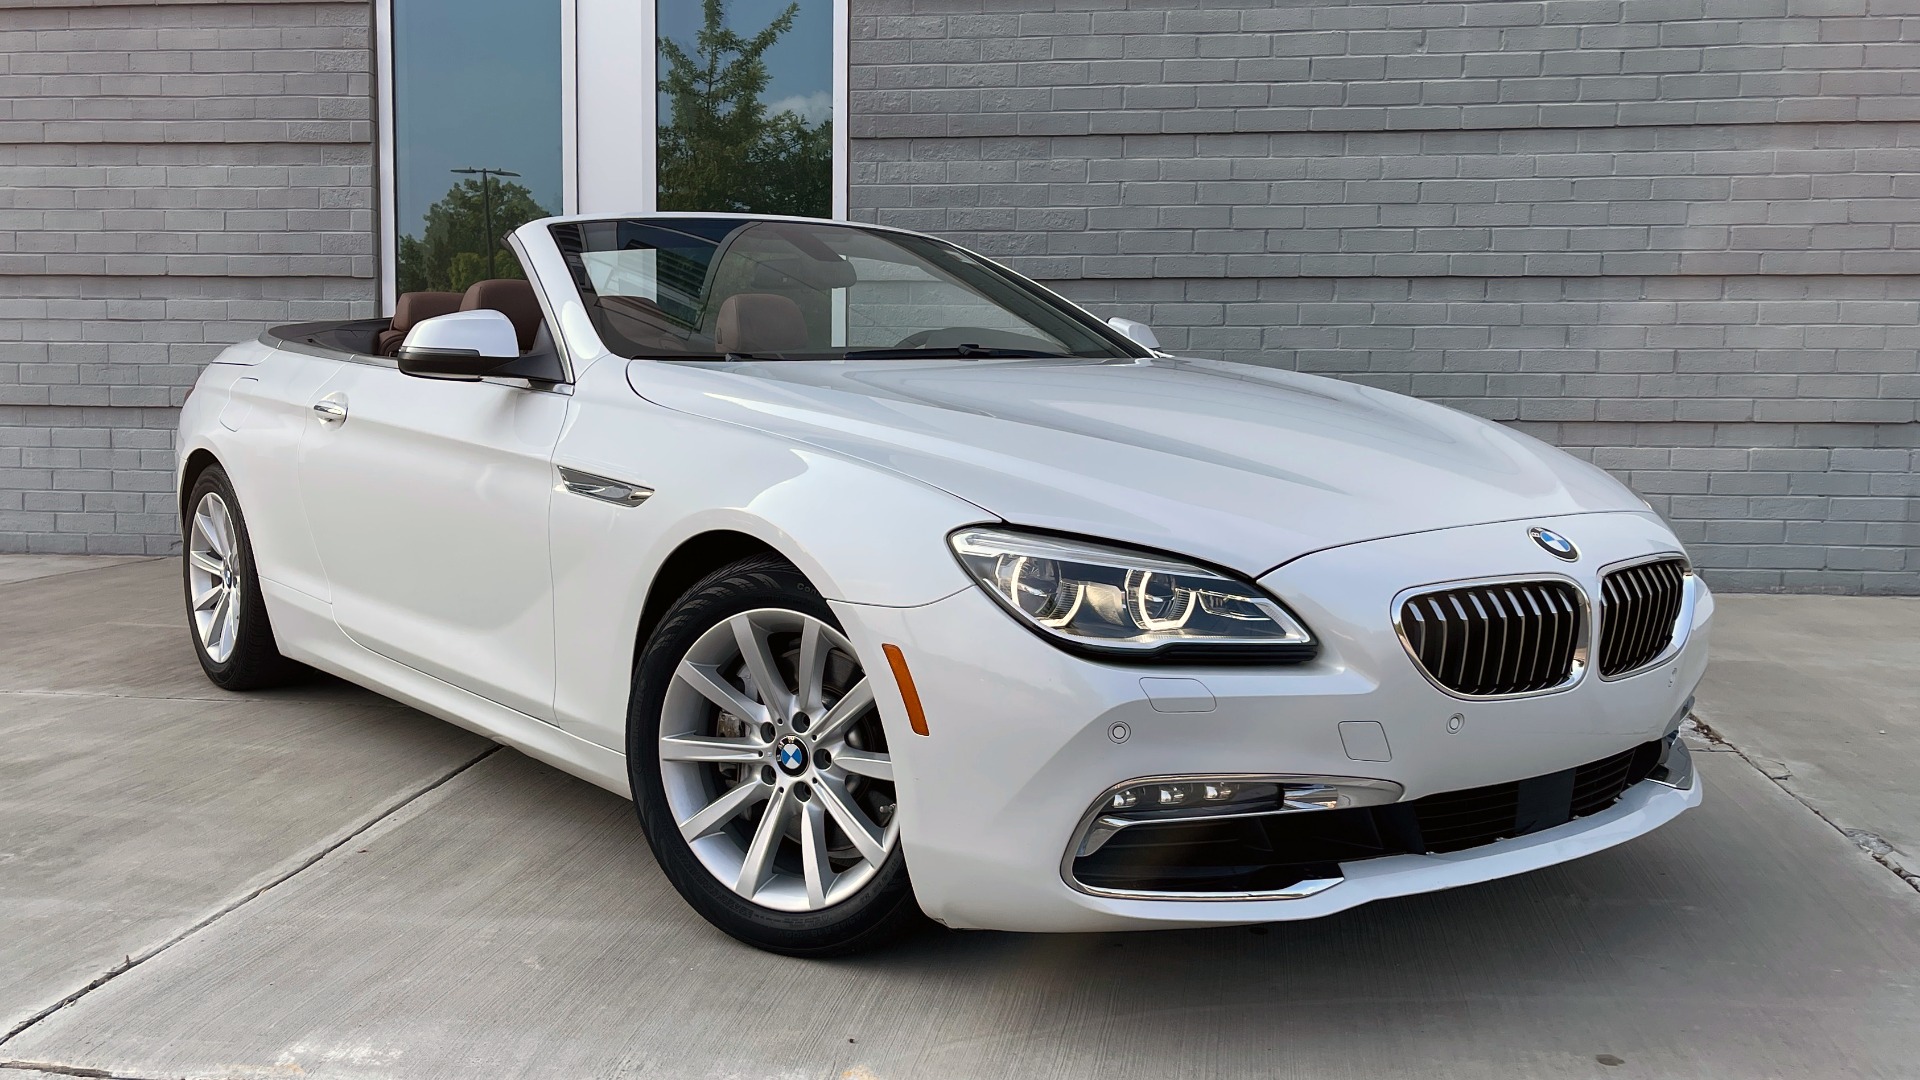 Used 2016 BMW 6 SERIES 640I CONVERTIBLE / 3.0L I6 / 8-SPD AUTO / RWD / NAV / REARVIEW for sale Sold at Formula Imports in Charlotte NC 28227 2